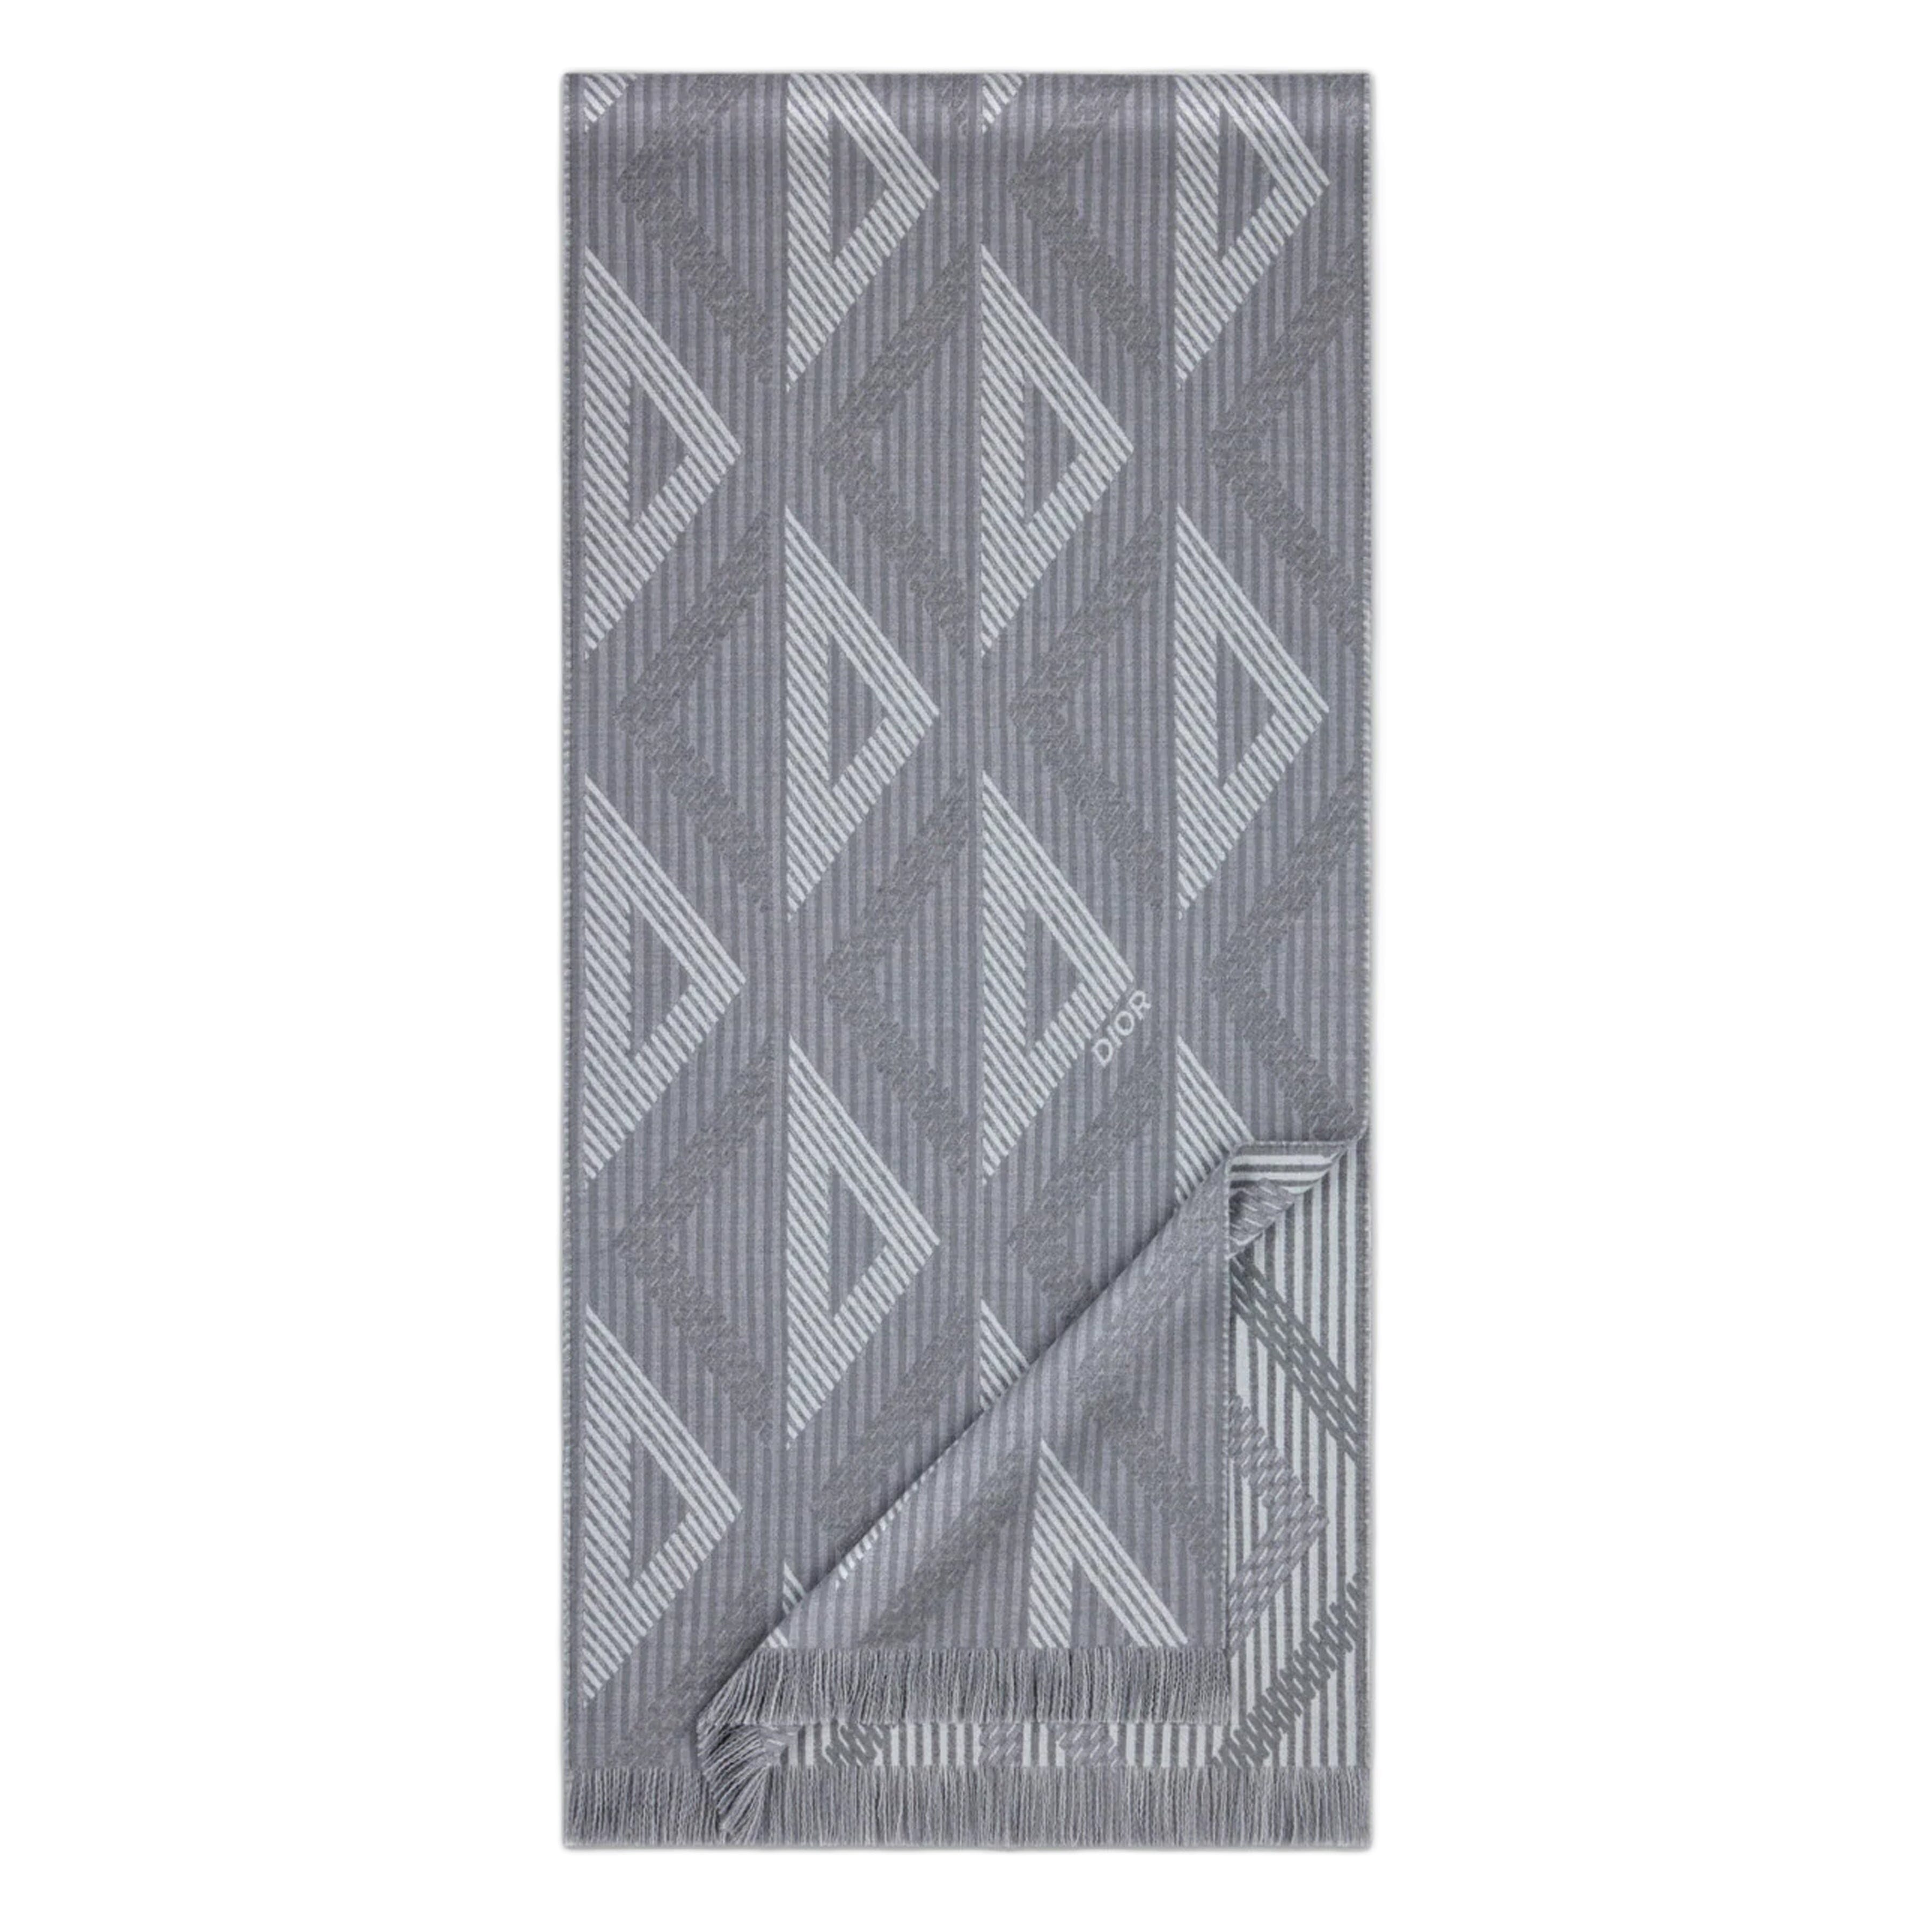 Grey Stripe/Triangle Patterened Fringed Scarf